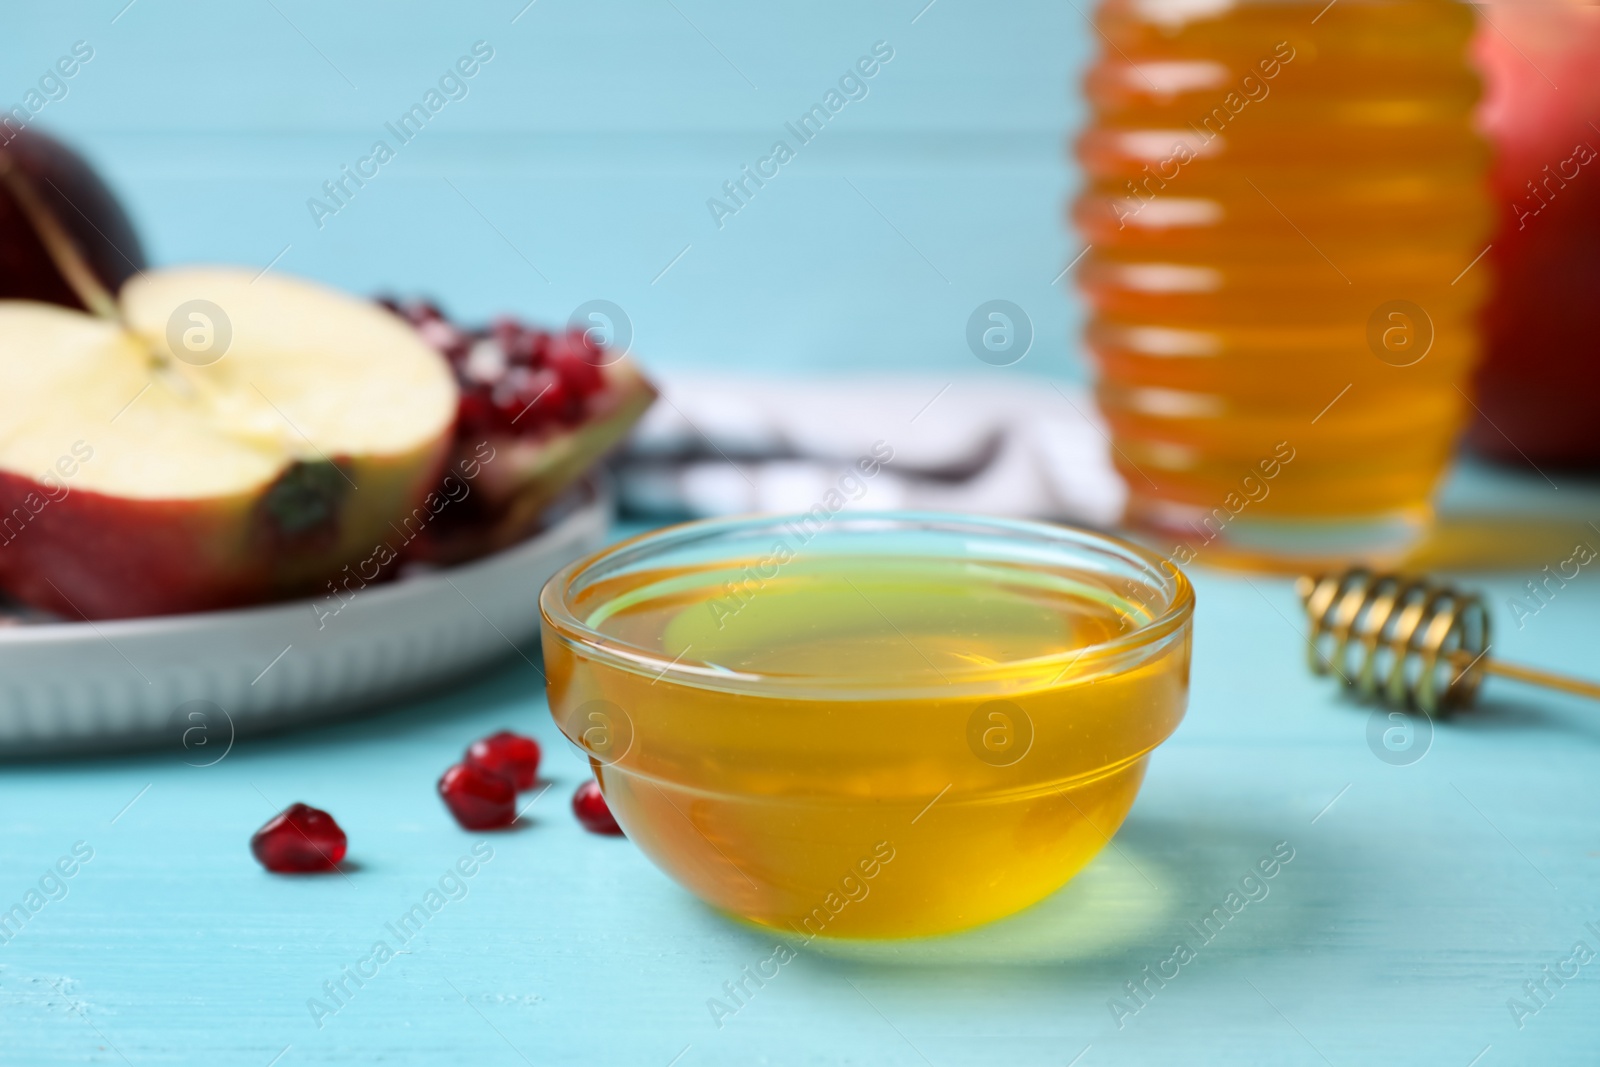 Photo of Honey, pomegranate seeds and apples on light blue wooden table. Rosh Hashanah holiday